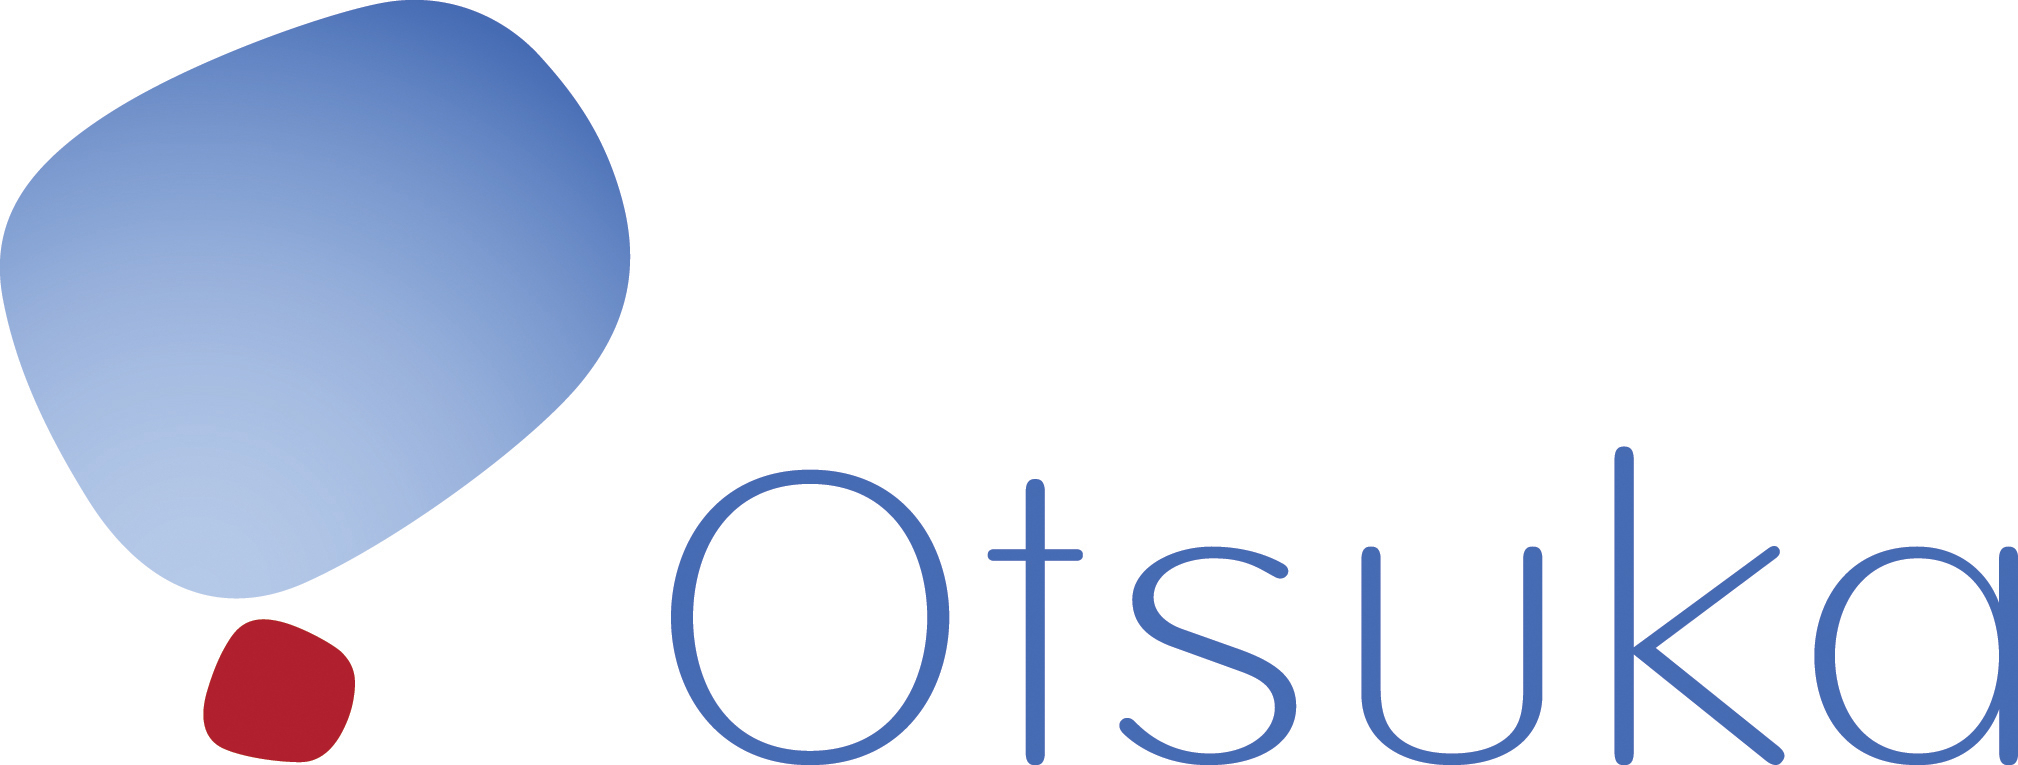 Otsuka and Lundbeck Announce U.S. Food and Drug Administration (FDA)  Approval of Supplemental New Drug Application (sNDA) for REXULTI®  (brexpiprazole) for the Treatment of Agitation Associated with Dementia Due  to Alzheimer's Disease